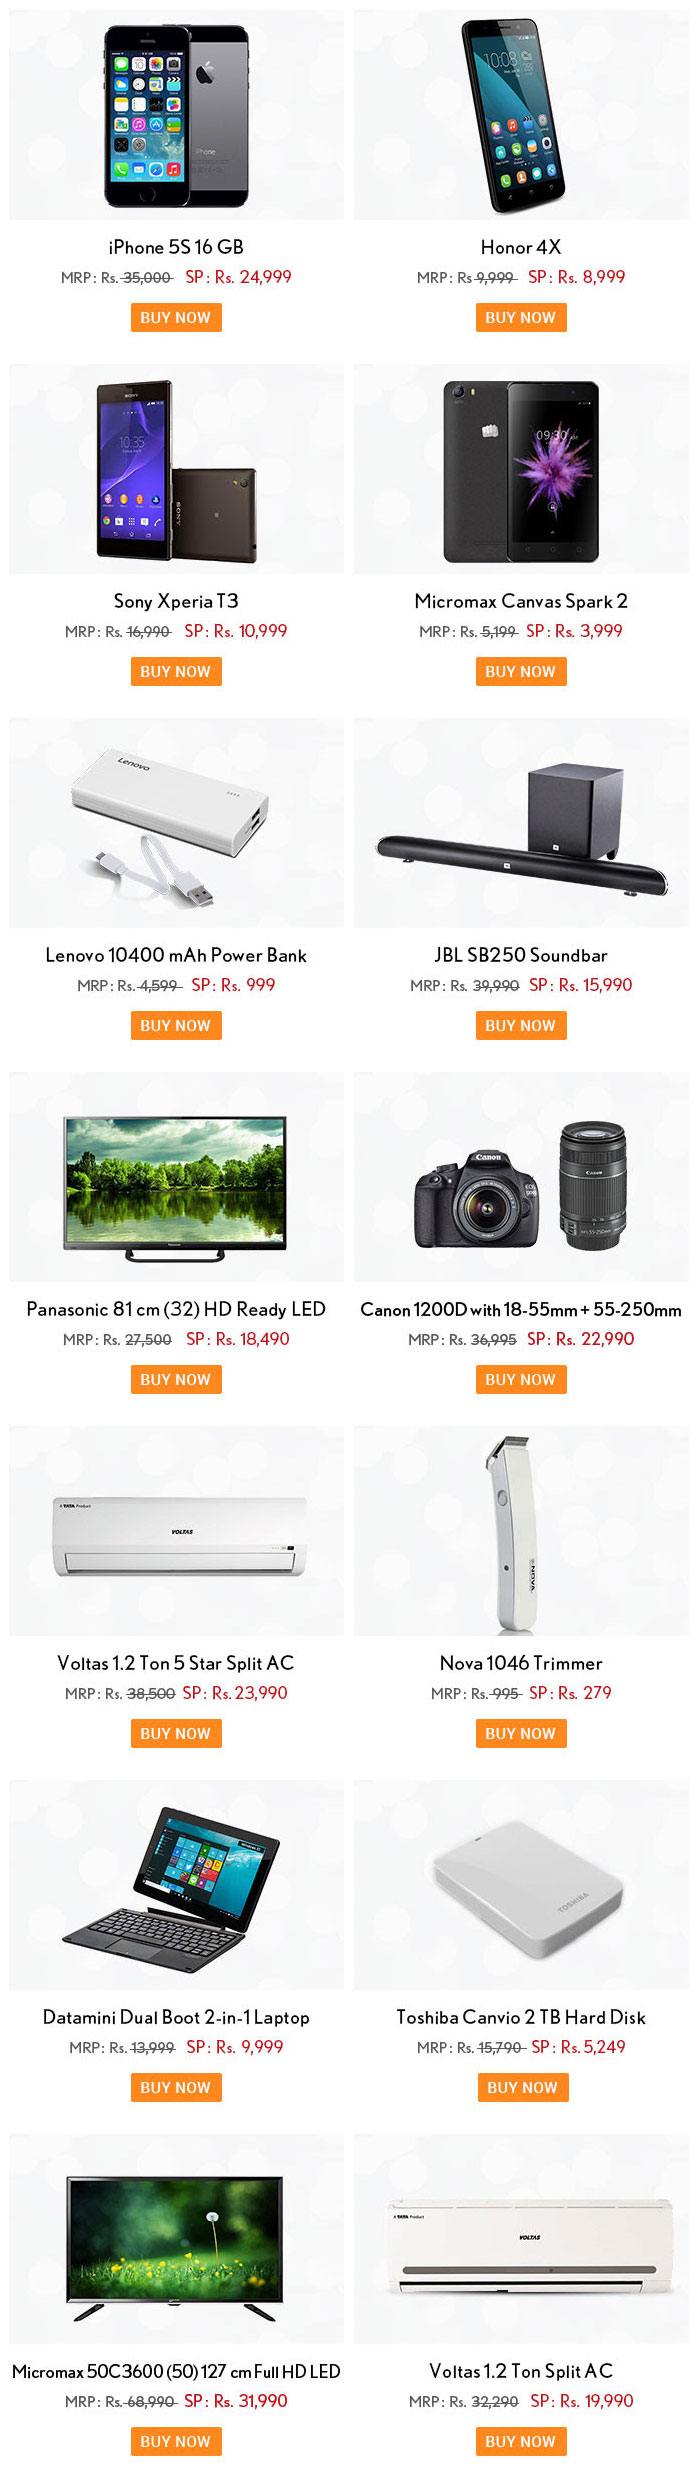 snapdeal-ultimate-monday-electronics-offers-sale-2nd-november-2015-diwali